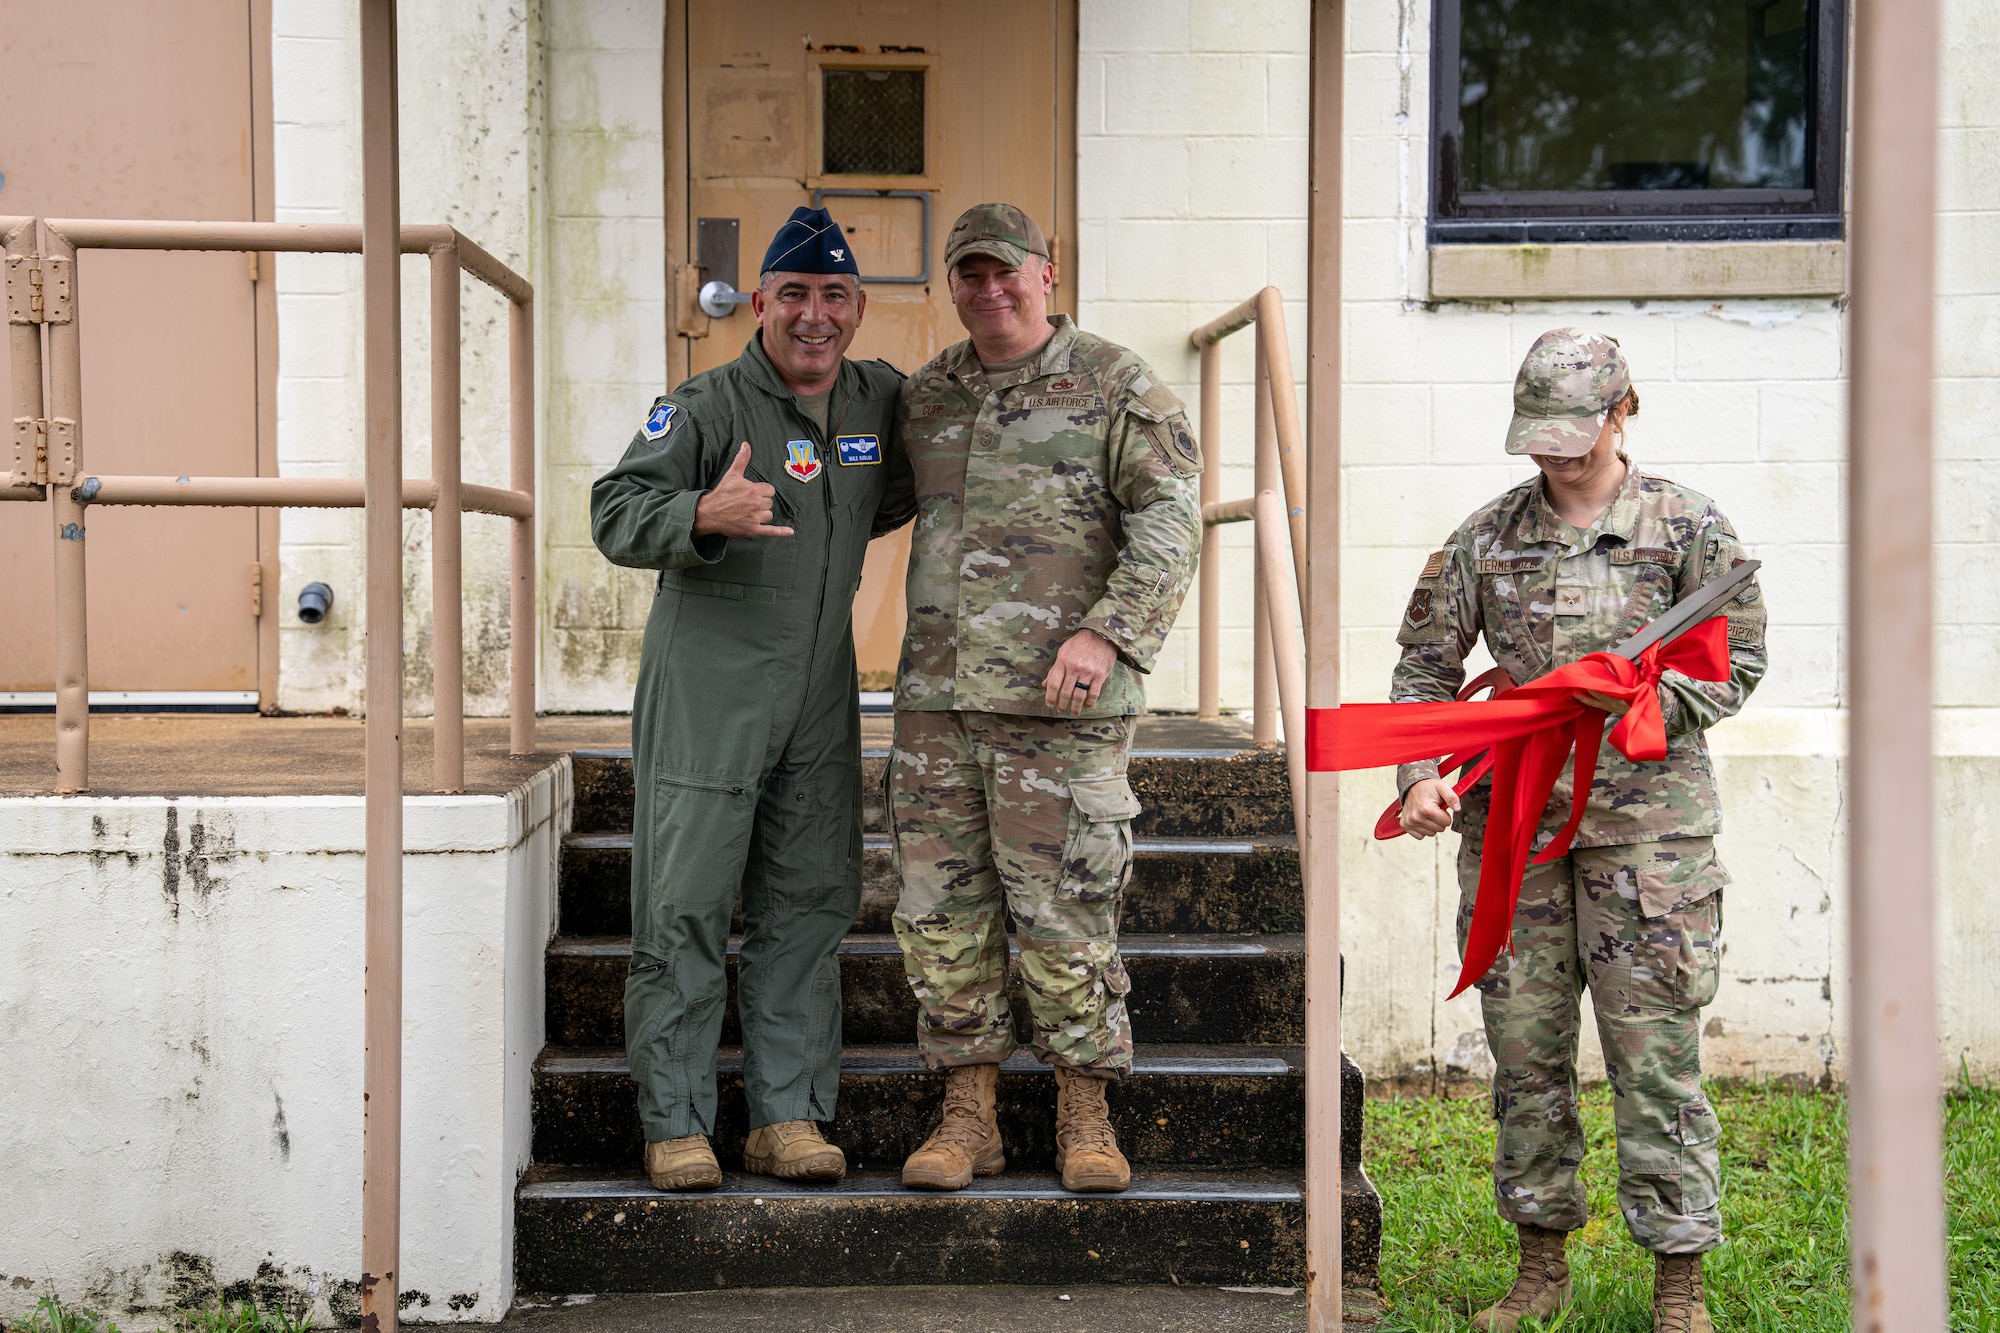 U.S. Air Force Col. Josh Koslov, 350th Spectrum Warfare Wing commander, left, Chief Master Sgt. William Cupp, 350th SWW command chief, center, and Senior Airman Robbi Termentozzi, Program Management Office programs manager, right, celebrate a ribbon cutting ceremony for new office spaces at Eglin Air Force Base, July 14, 2023. The new space features 2,300 square feet of workspace including 40 additional workstations. (Courtesy Photo)